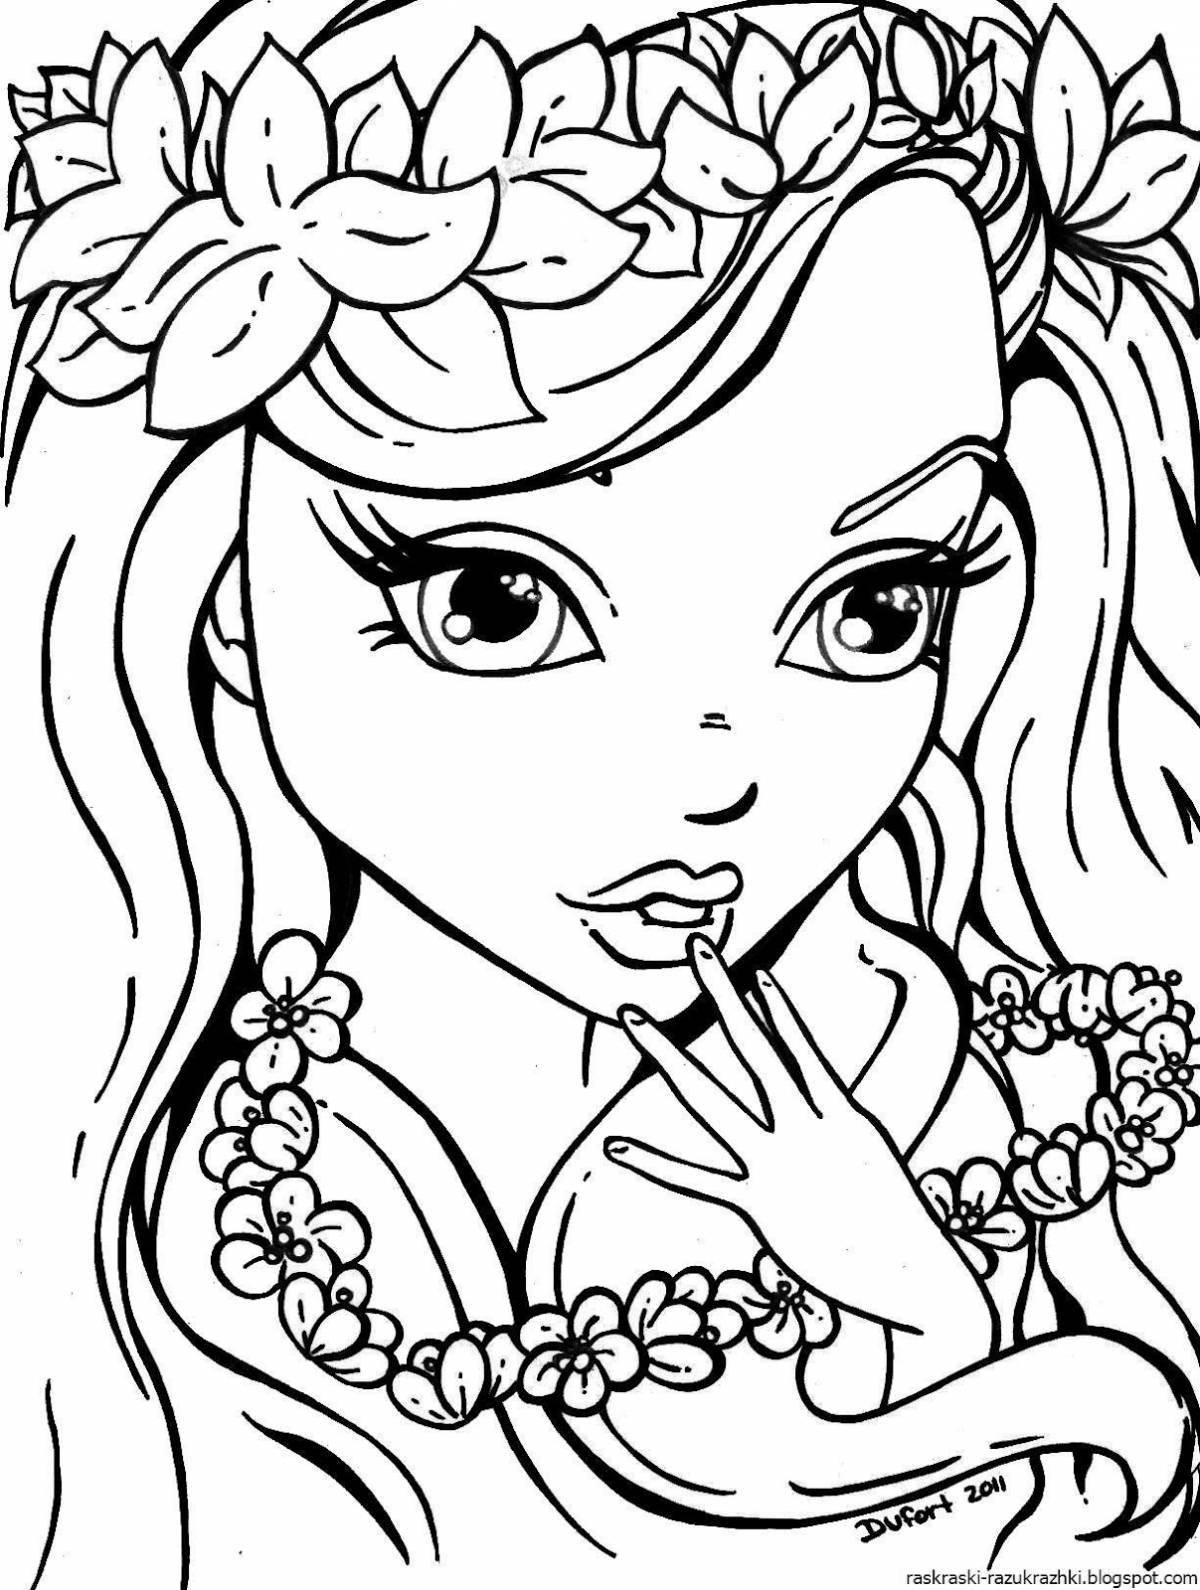 Exquisite coloring book for girls 5-7 years old